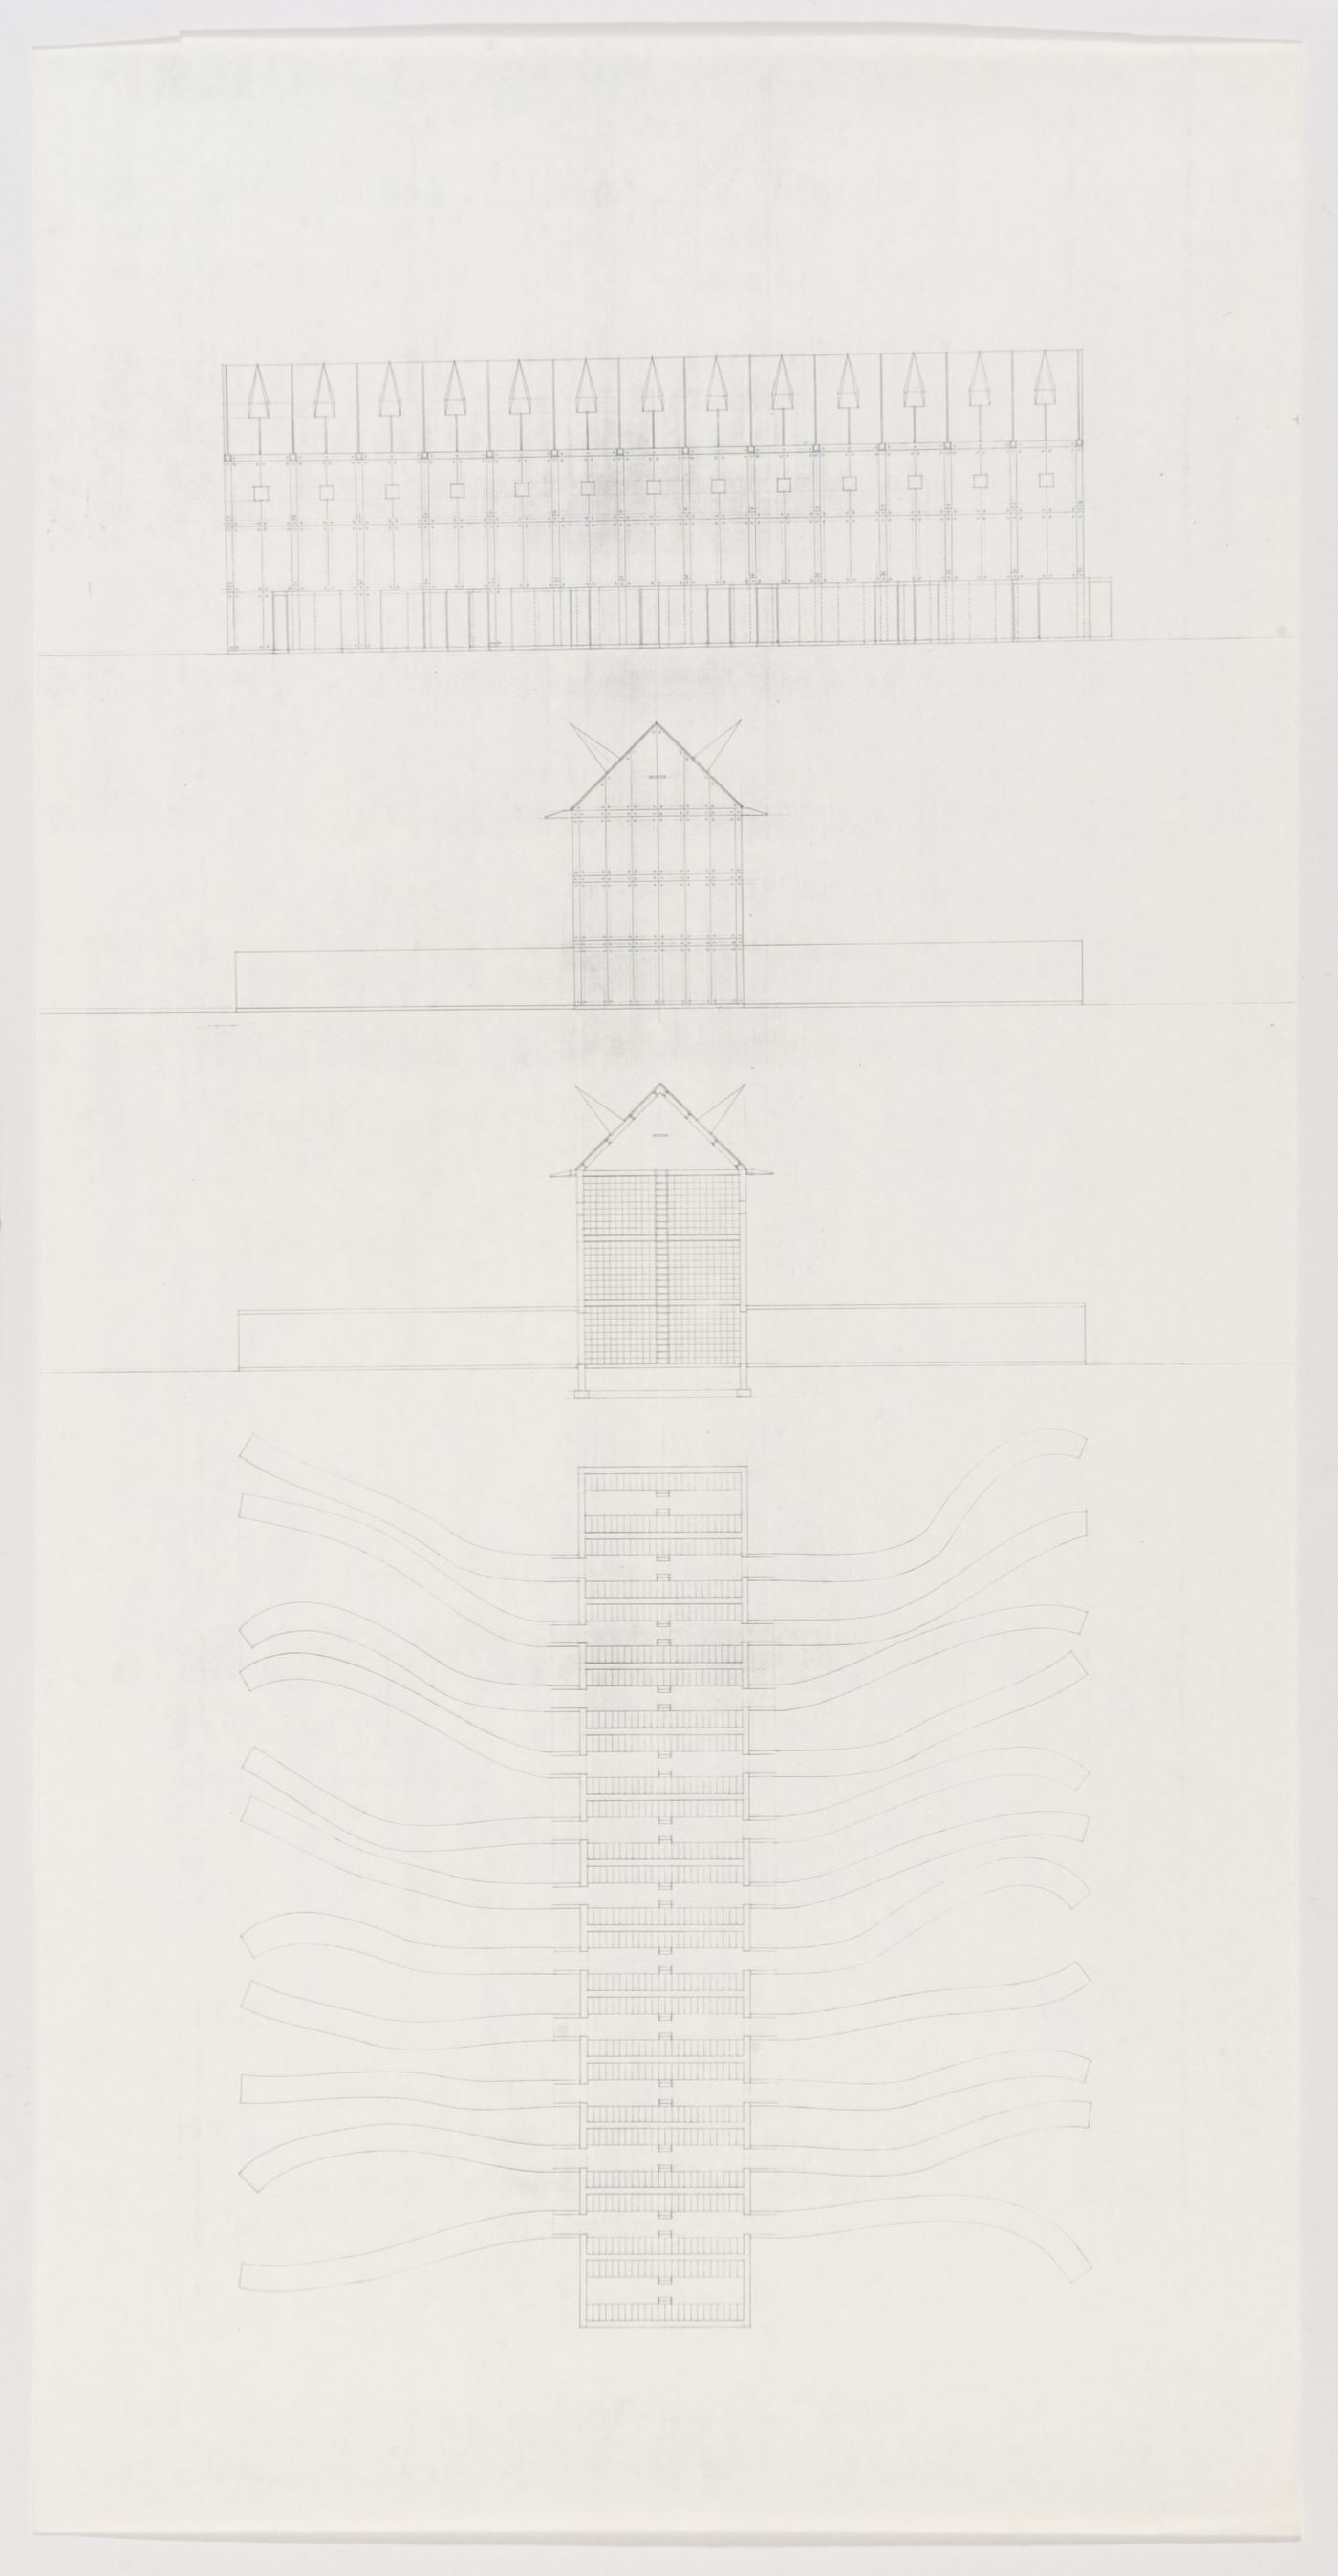 Front and side elevations, and plan of 45 Keeper of the Records - Record Hall, reprographic copy of original drawing for Victims